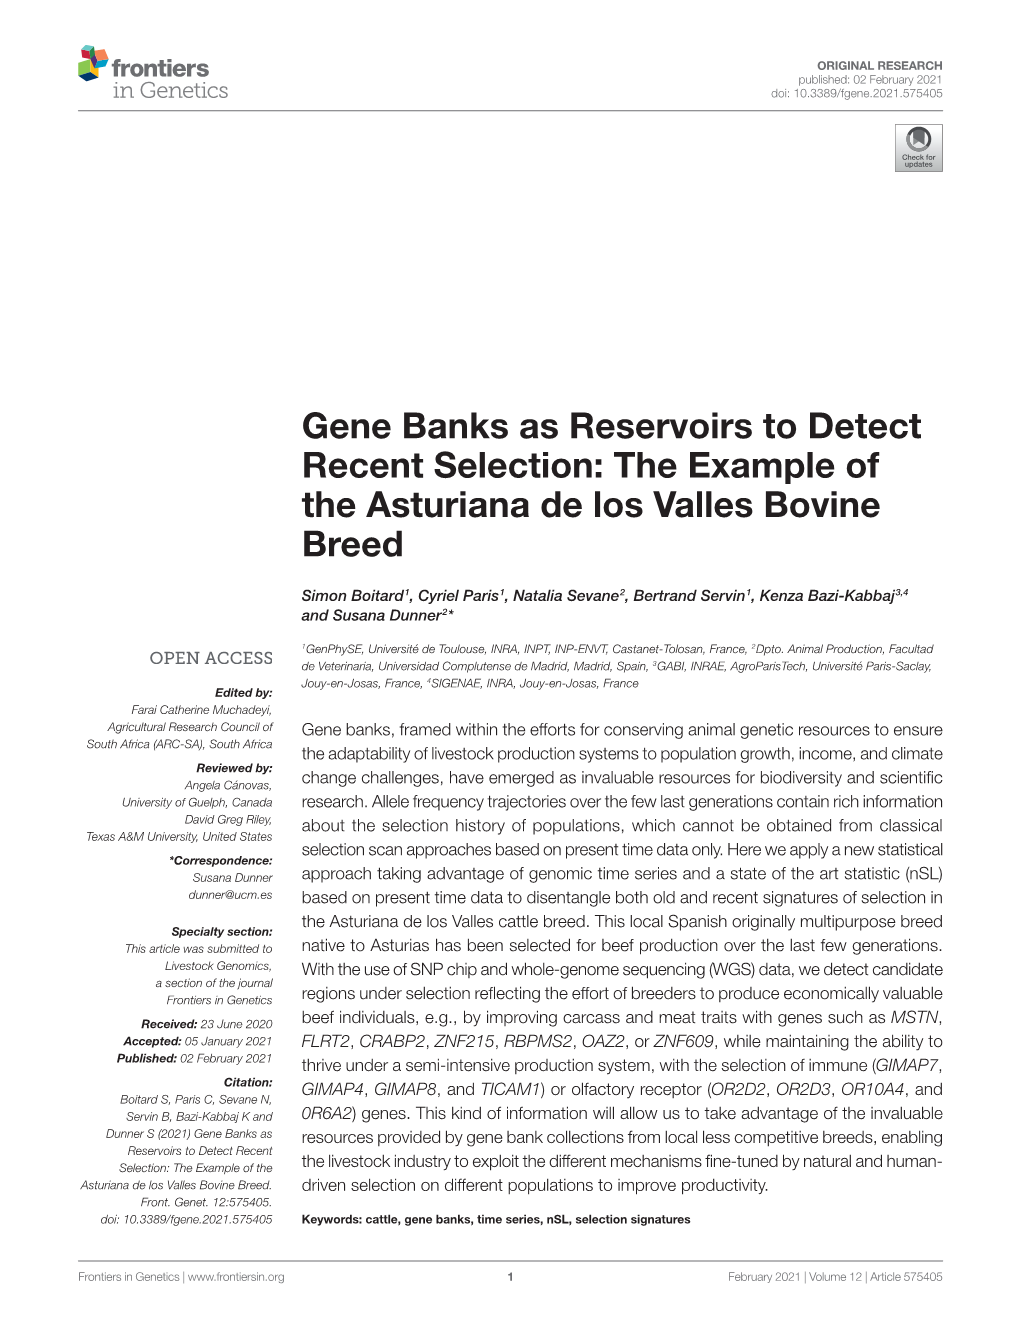 Gene Banks As Reservoirs to Detect Recent Selection: the Example of the Asturiana De Los Valles Bovine Breed